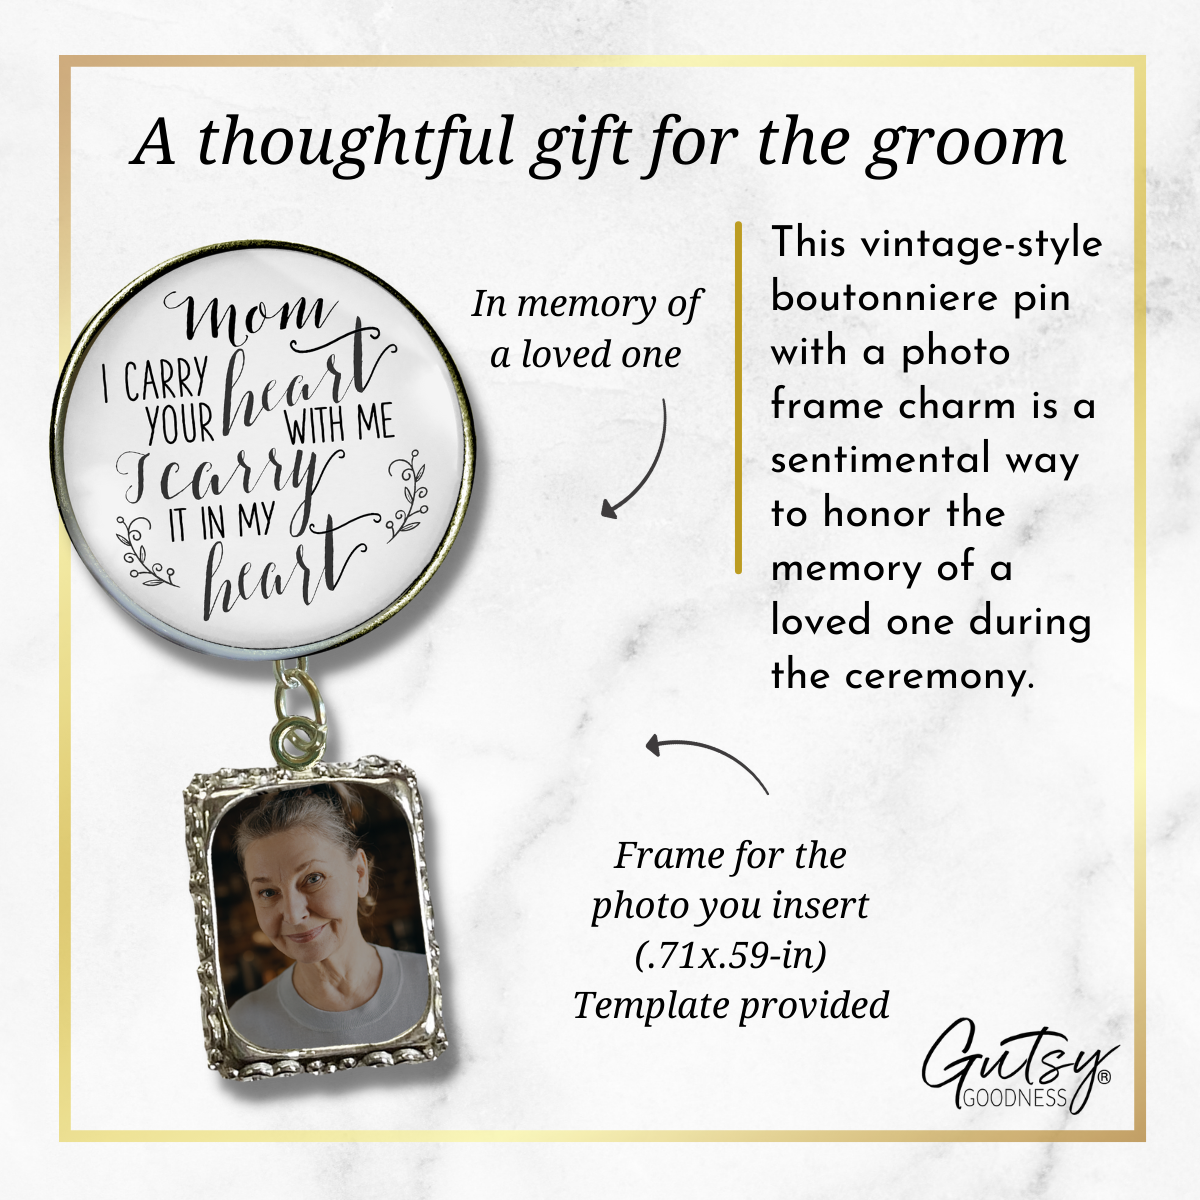 Wedding Memorial Boutonniere Pin Photo Frame Honor Mom Carry Heart Silver - Gutsy Goodness